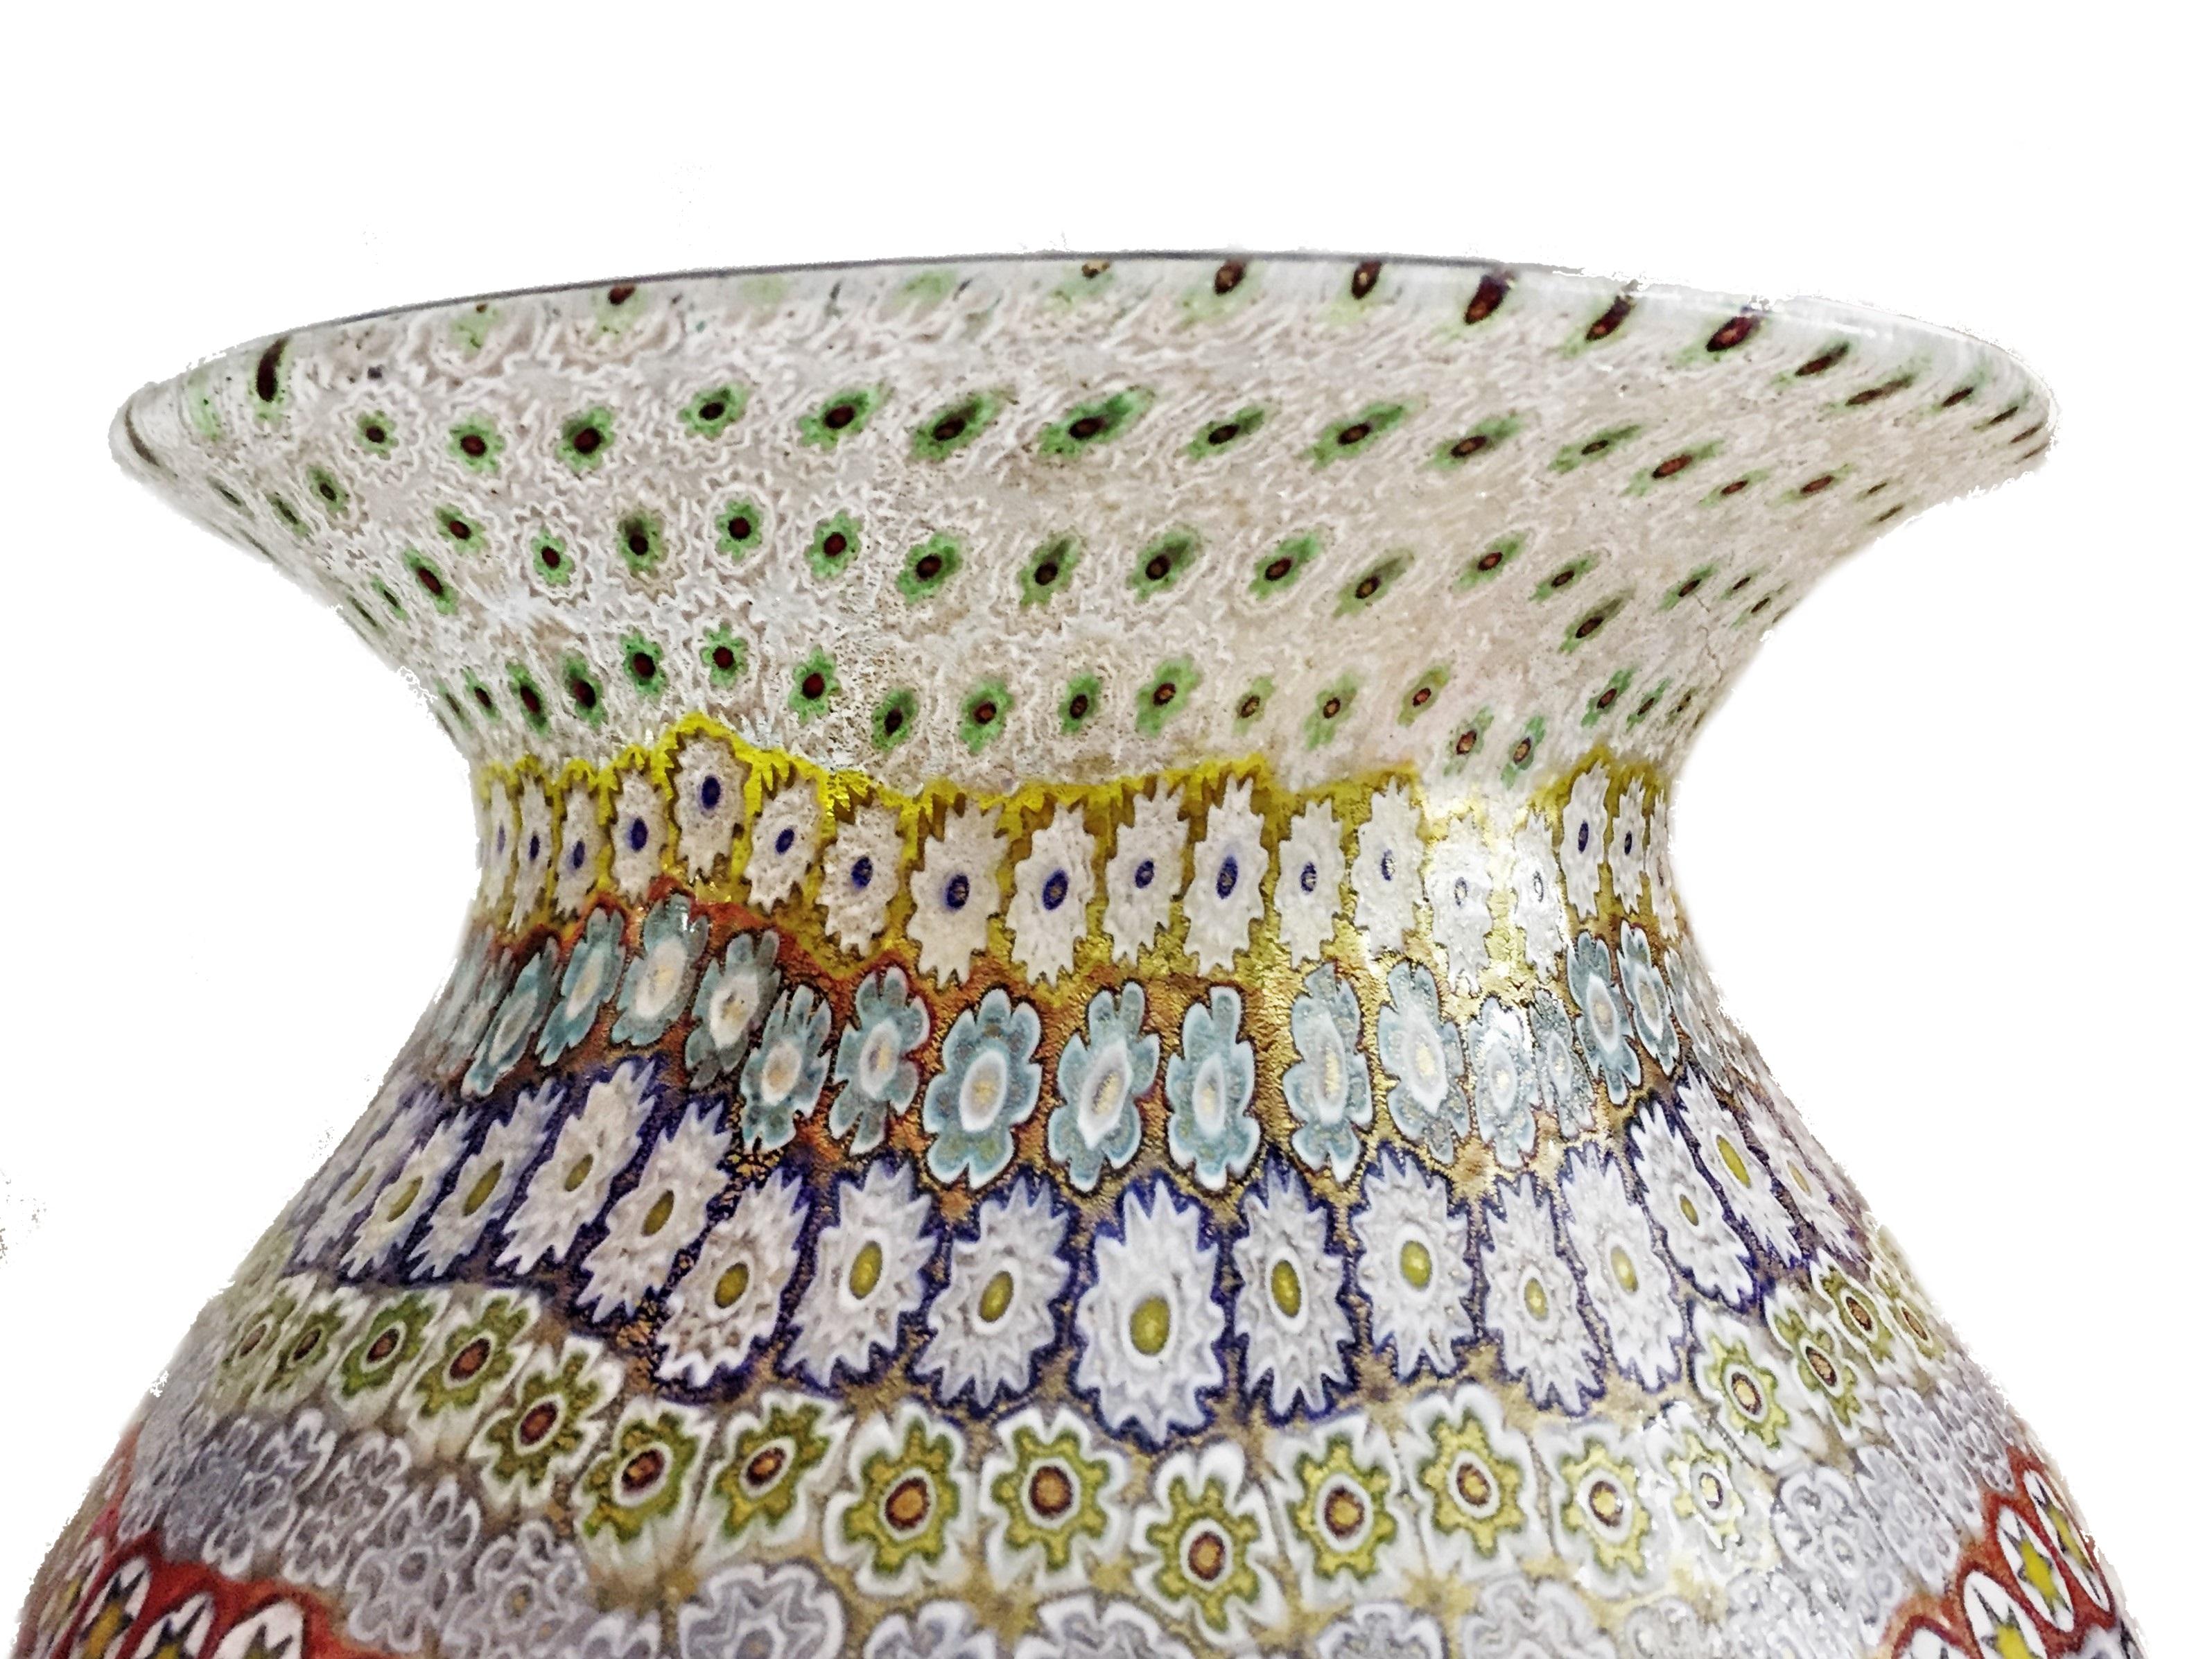 Dimensions:
Height 18-3/4 inches 
Diameter 8-3/4 inches

Found in the middle section of the vase’ neck, there is a round glass medallion with letter “m”, indented into it for Maestro Imperio Rossi.

This grand Murrine Millefiori decorative